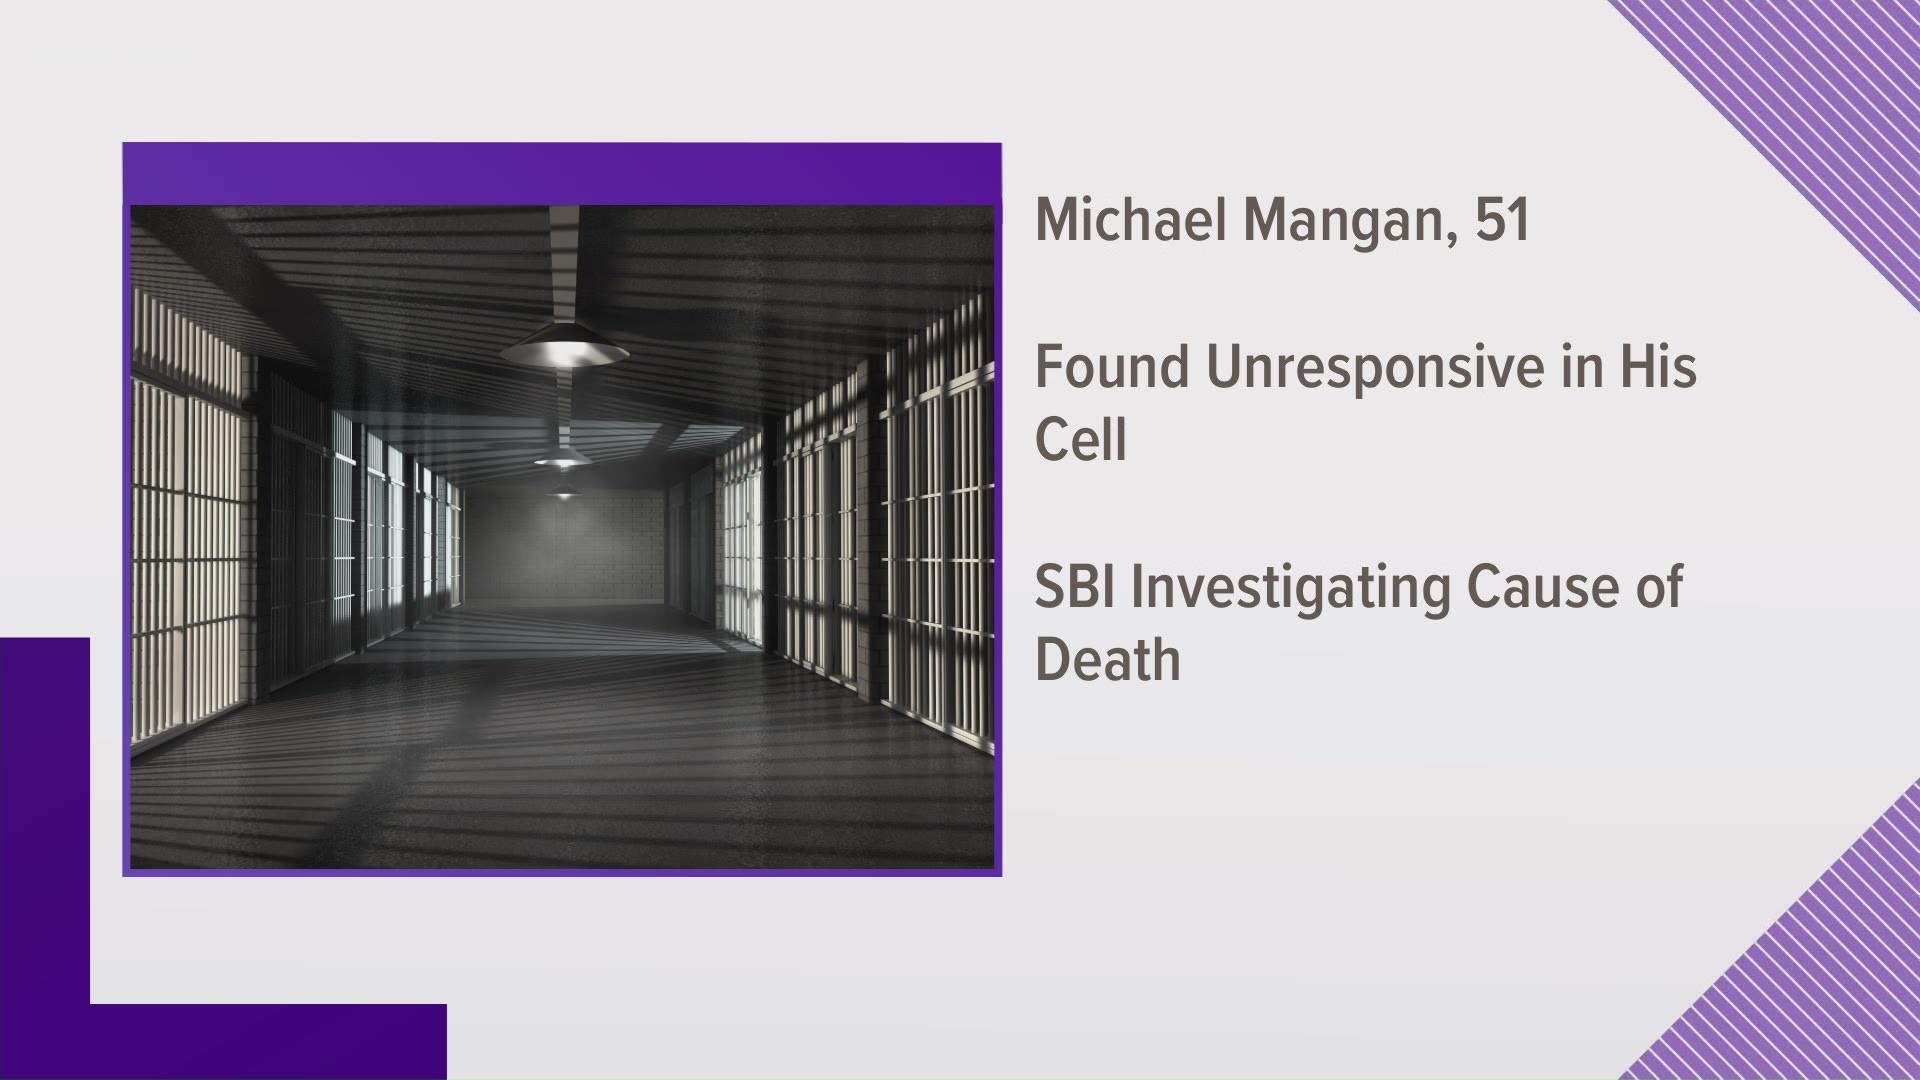 A 51-year-old inmate named Michael Mangan was found unresponsive in his cell.